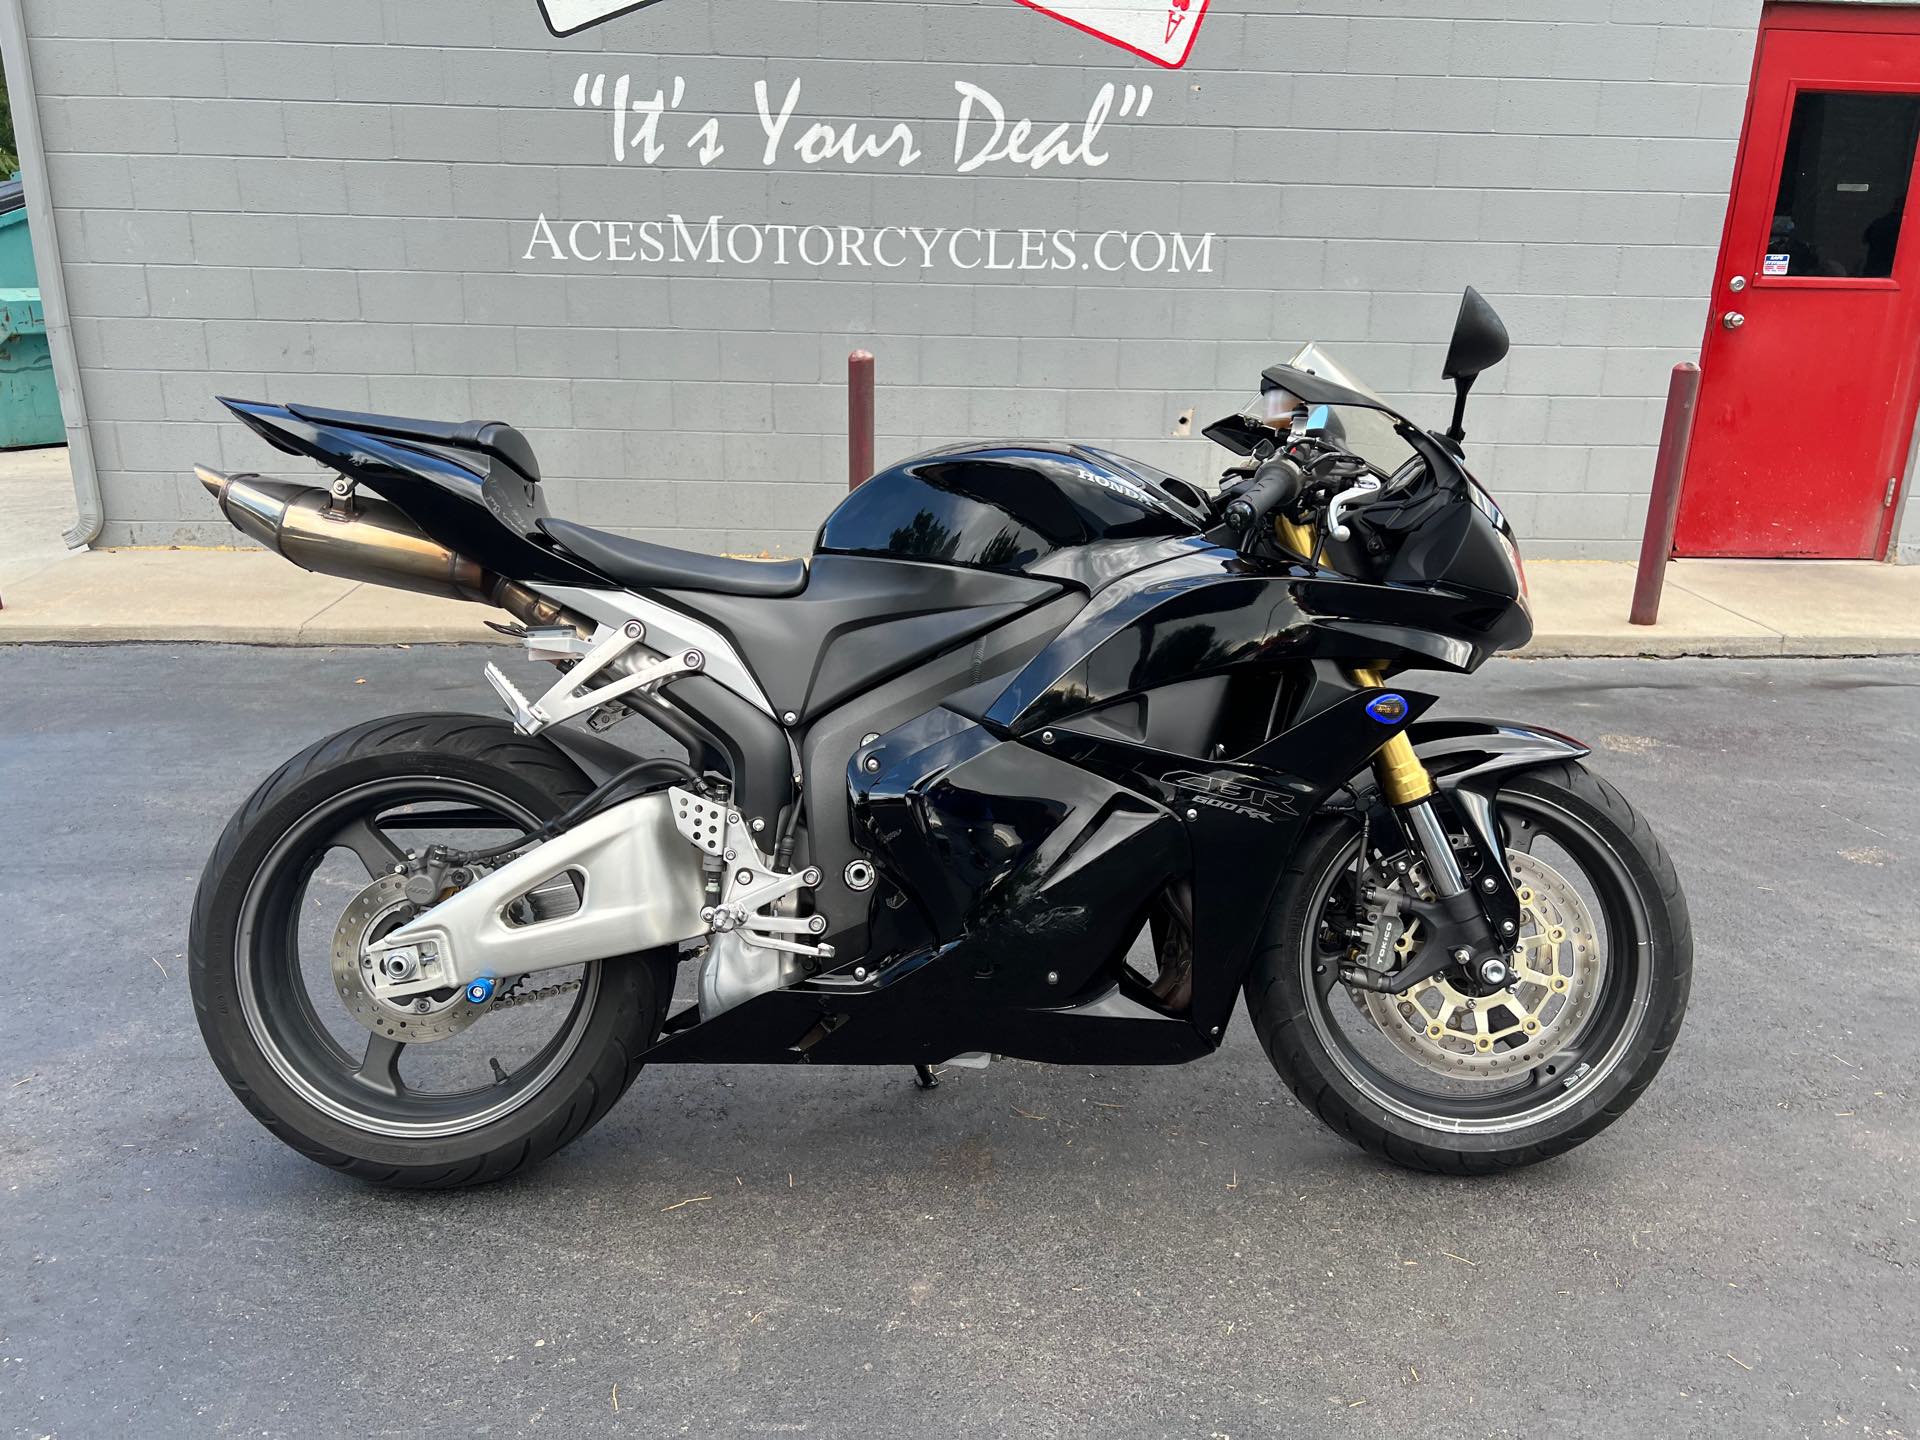 2012 Honda CBR 600RR at Aces Motorcycles - Fort Collins